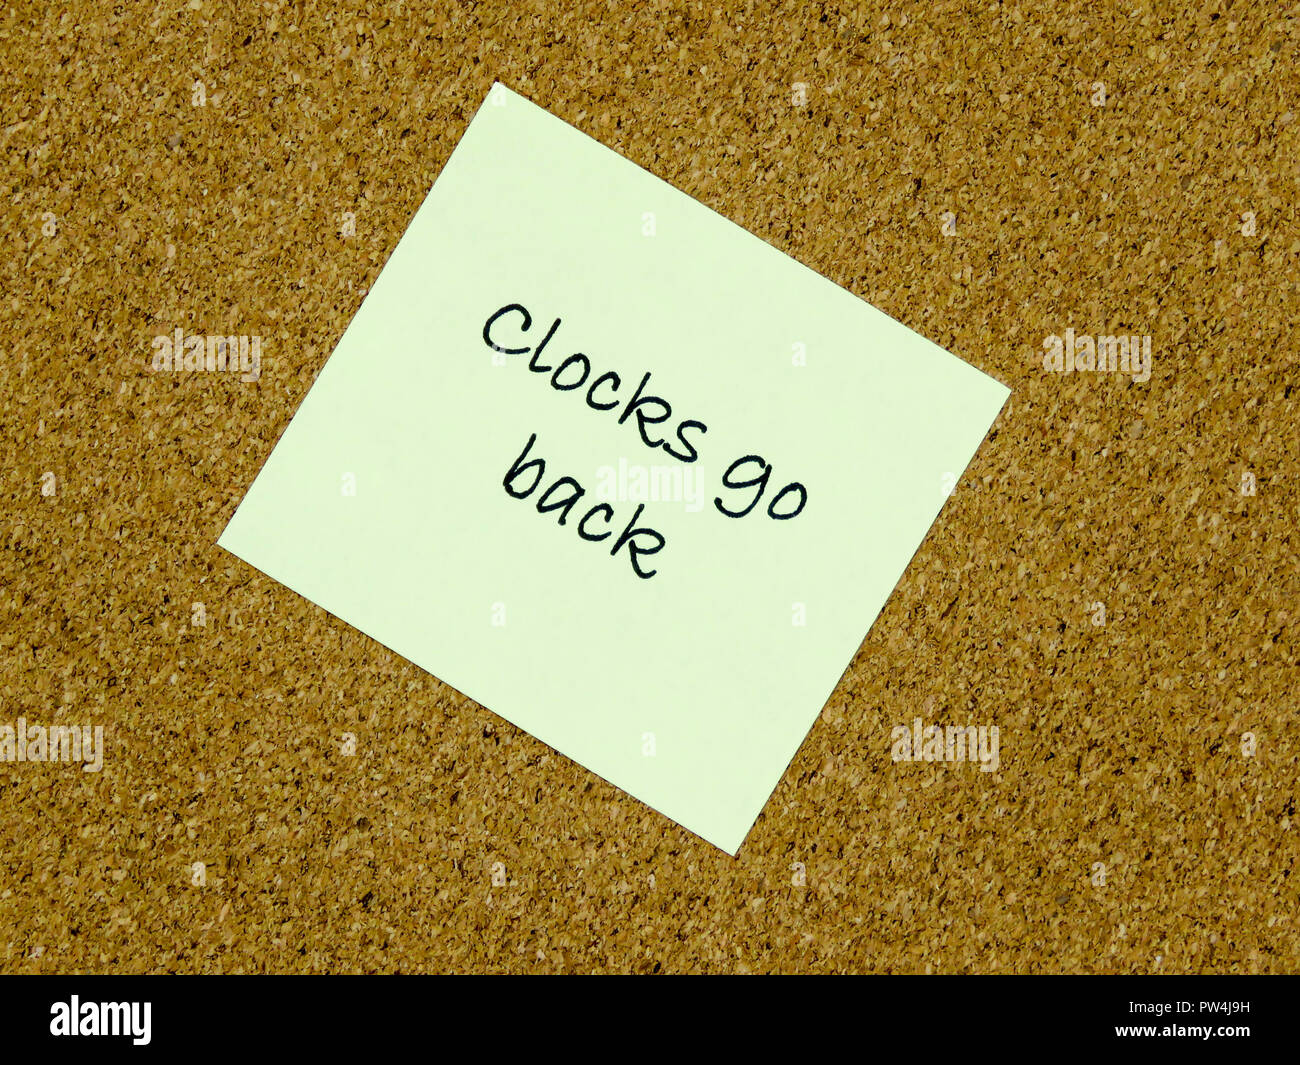 A yellow sticky note with clocks go back written on it on a cork board background Stock Photo